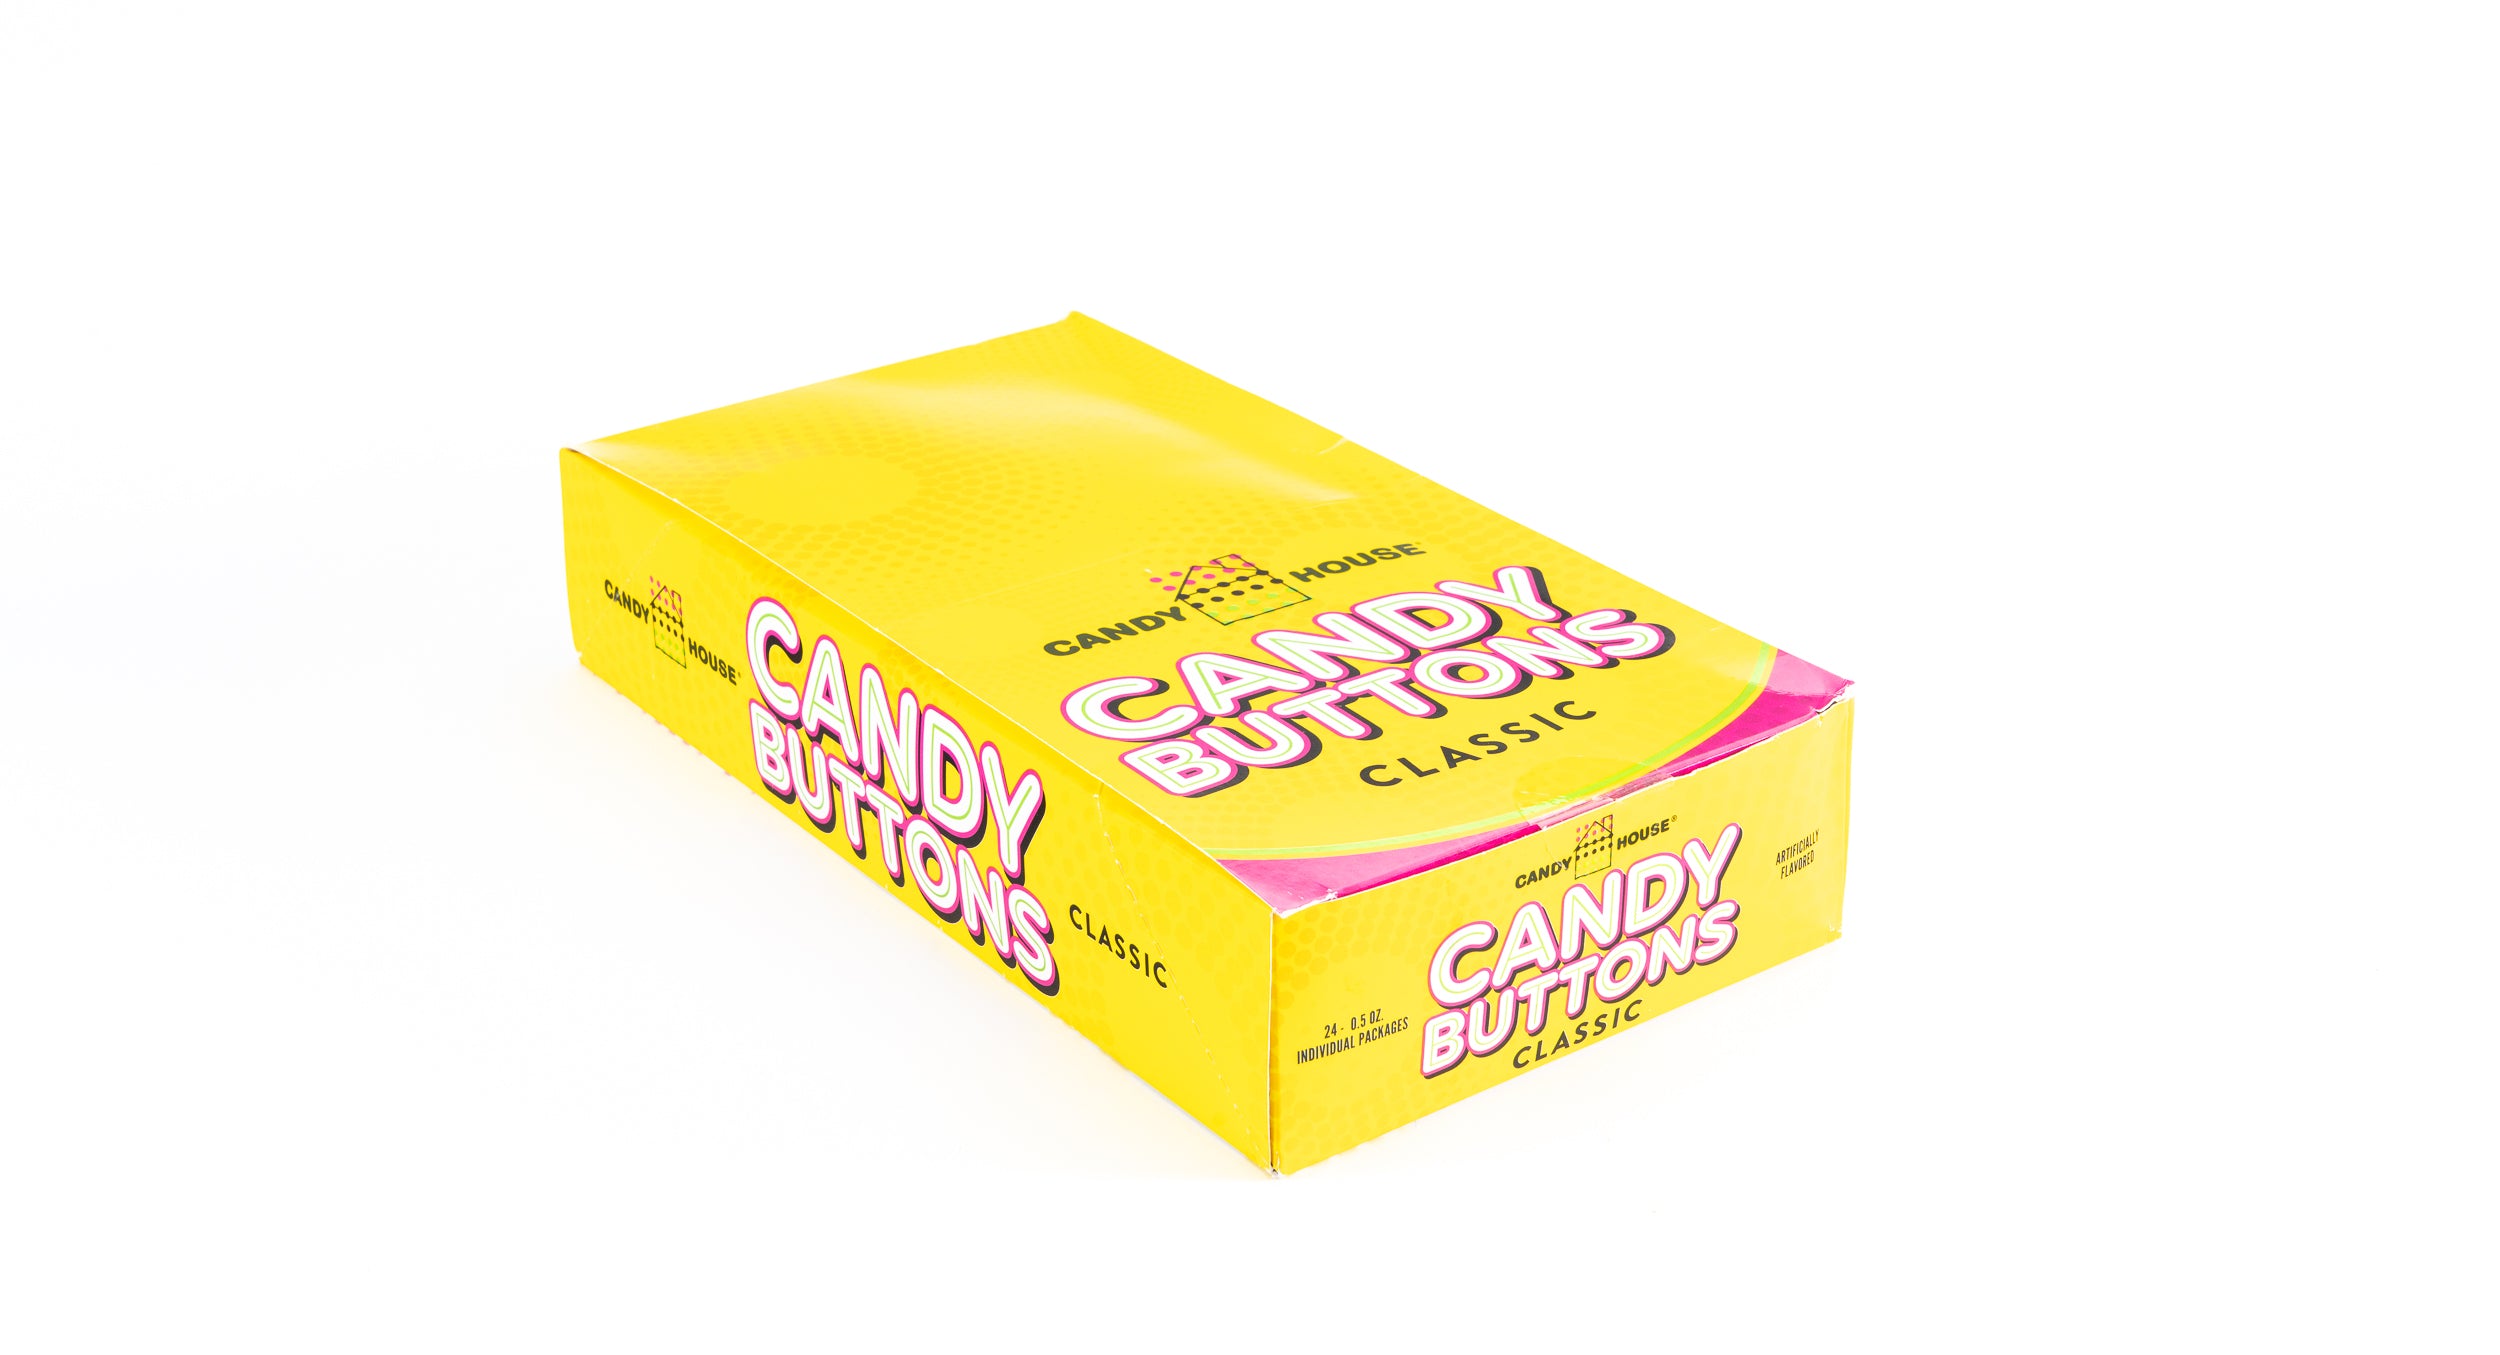 Candy Buttons Classic Candy House Bulk Box (0.5 oz, 24 ct.)